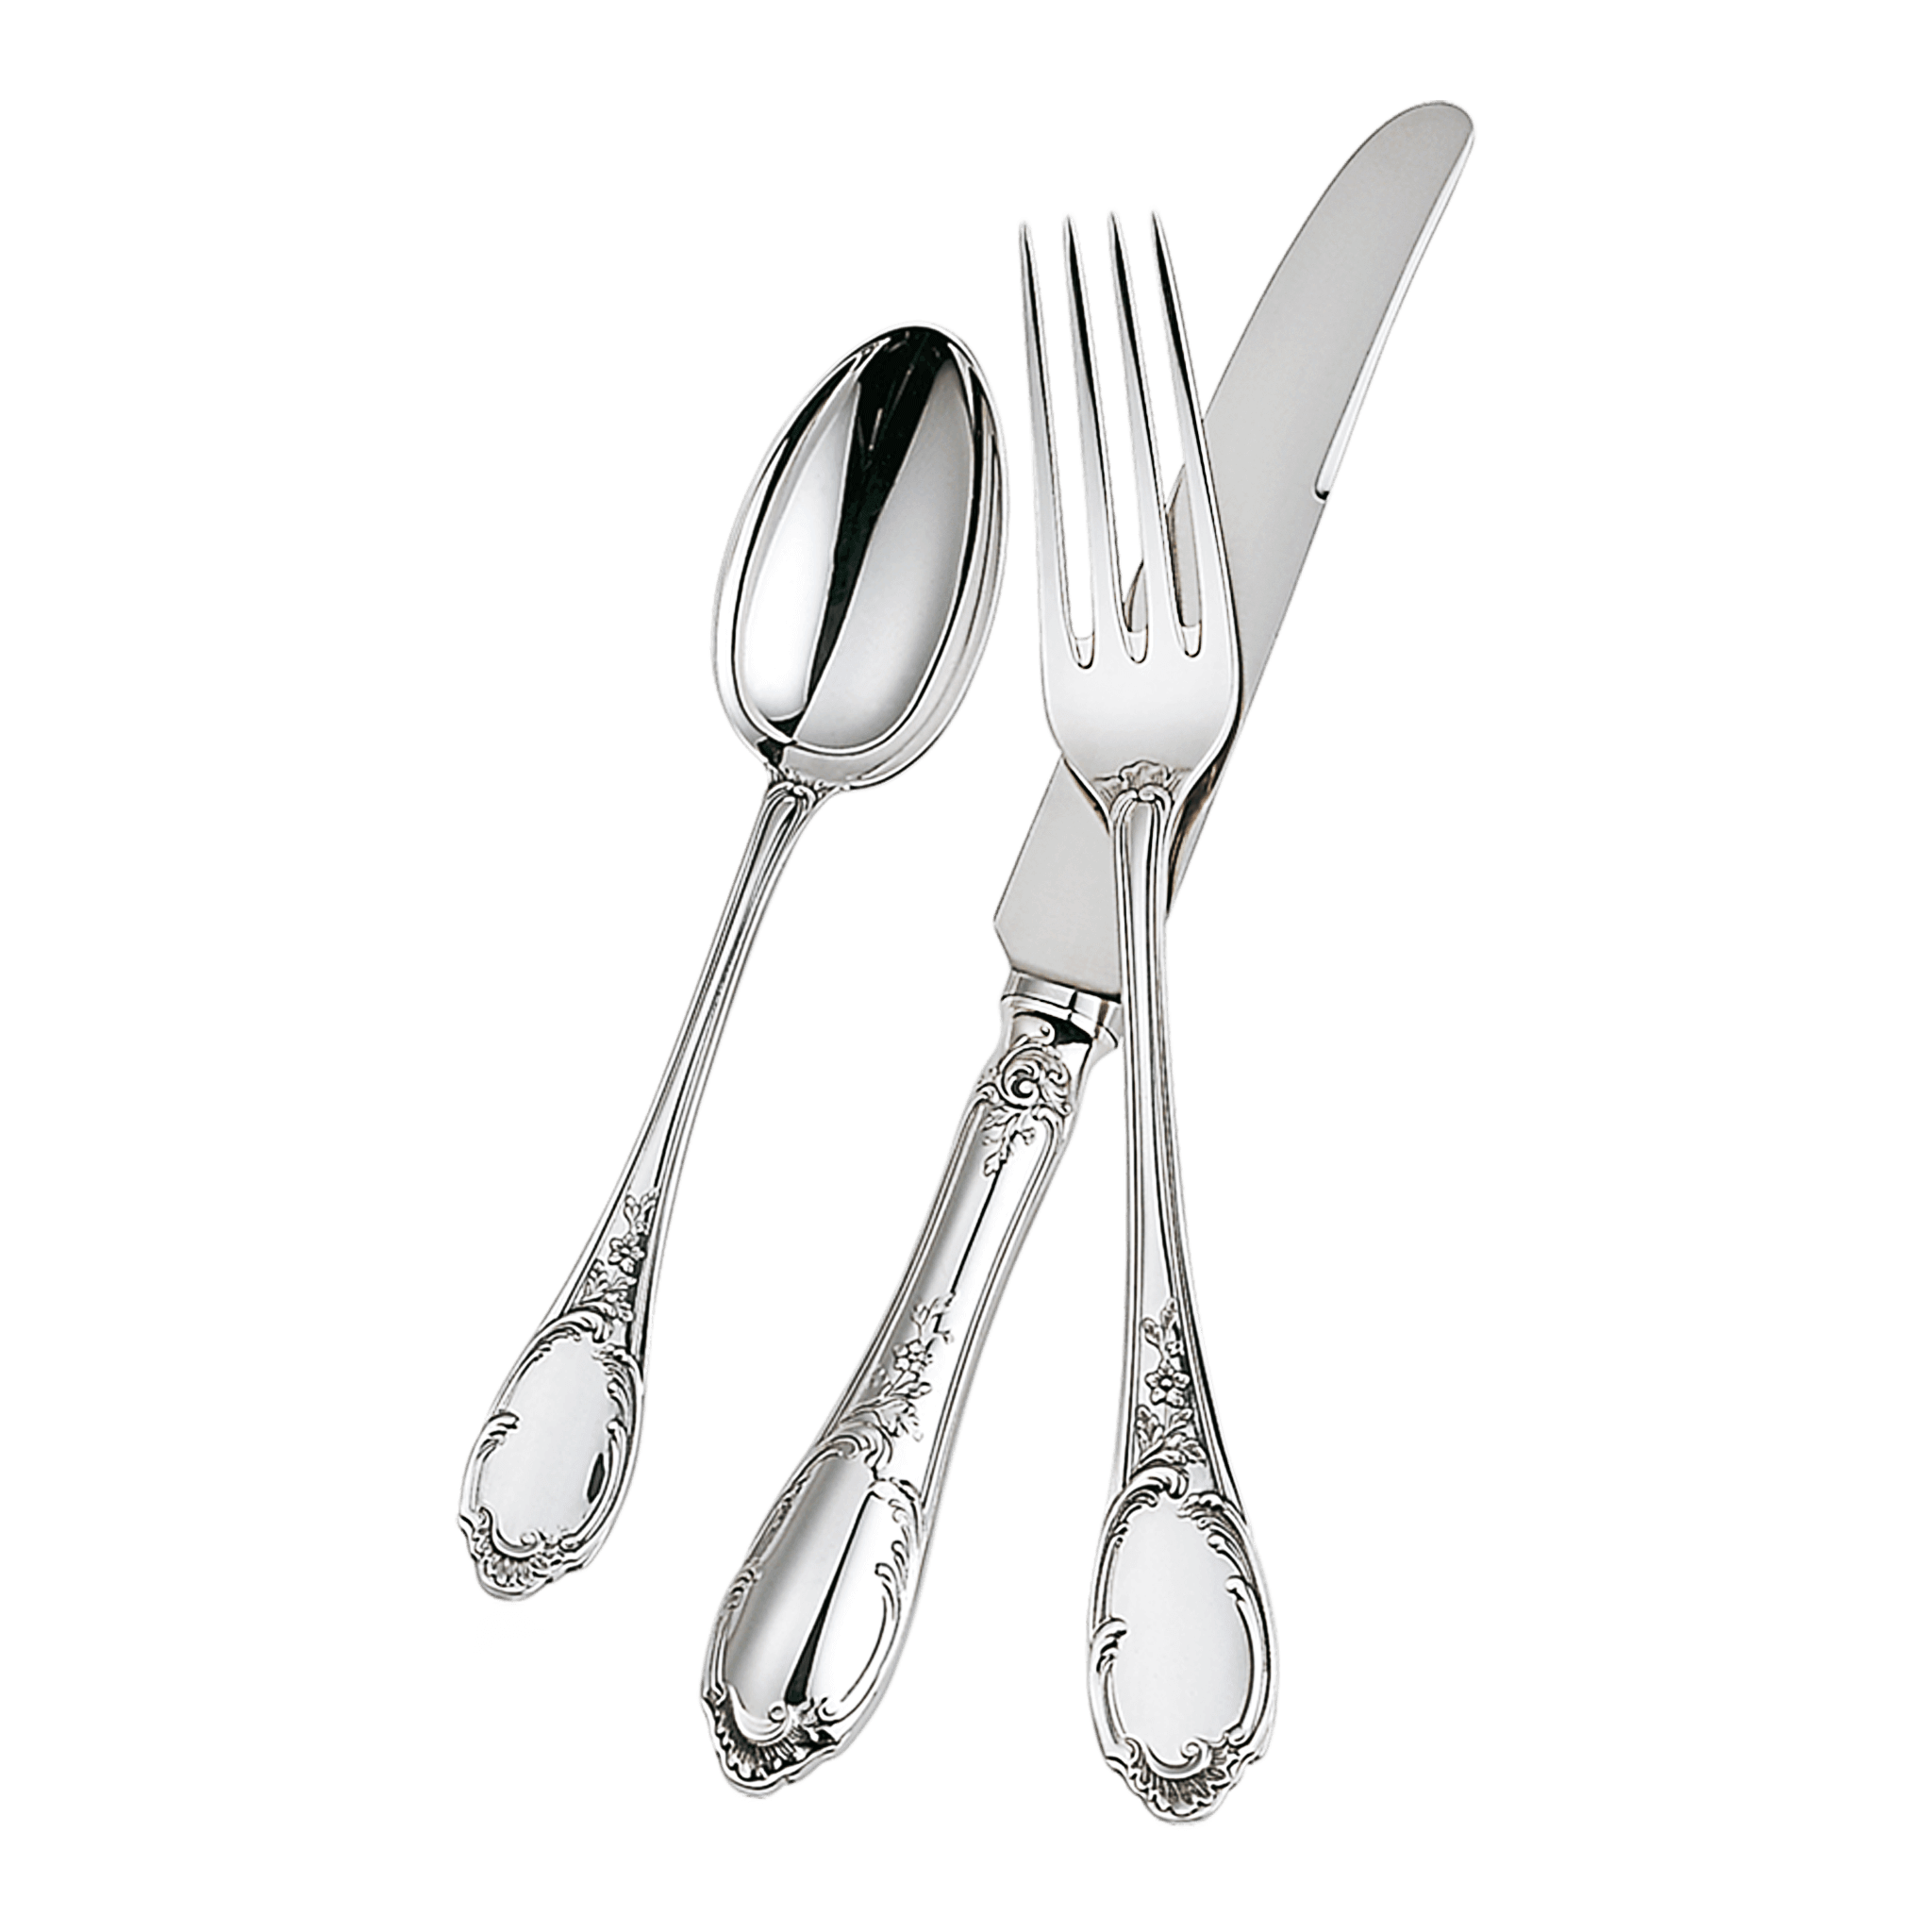 Silver-plated or Pure Silver Silverware? How to Tell the Difference Between the Two | Piece Silver Crafting By Zion Hadad